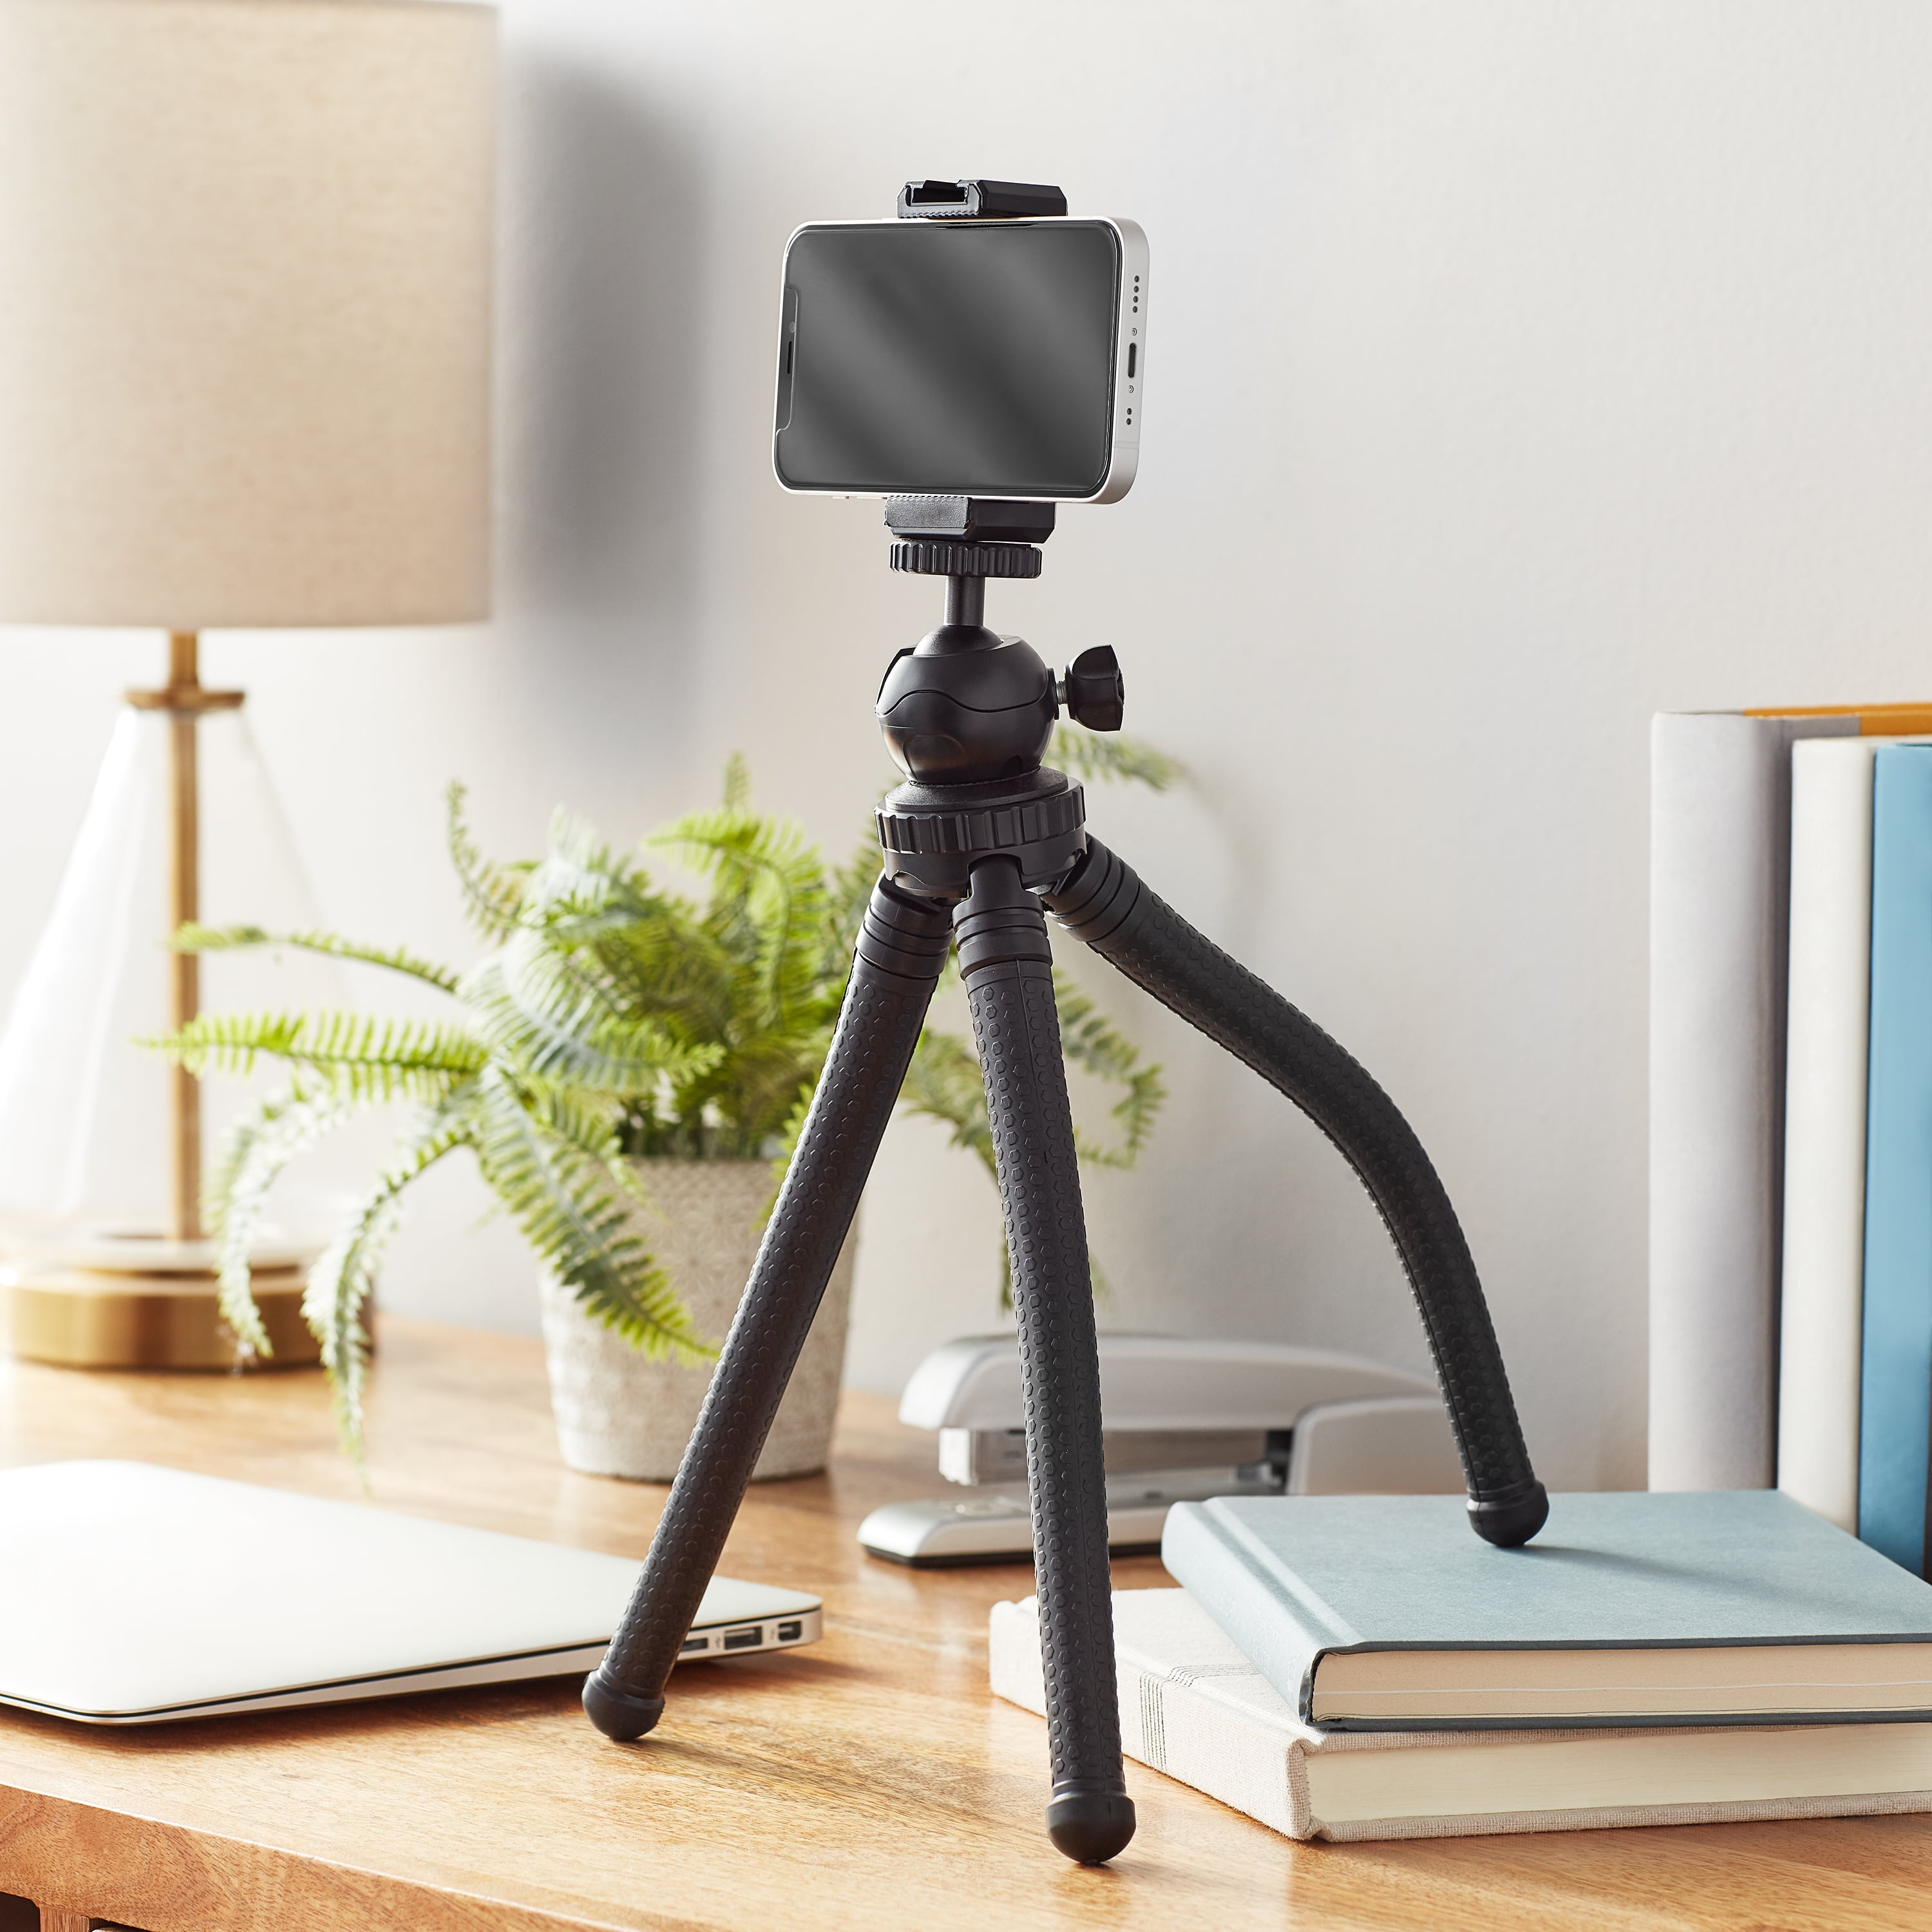 Mini Tripod Heavy Duty with strong legs Less than 4" tall for precision shots. 